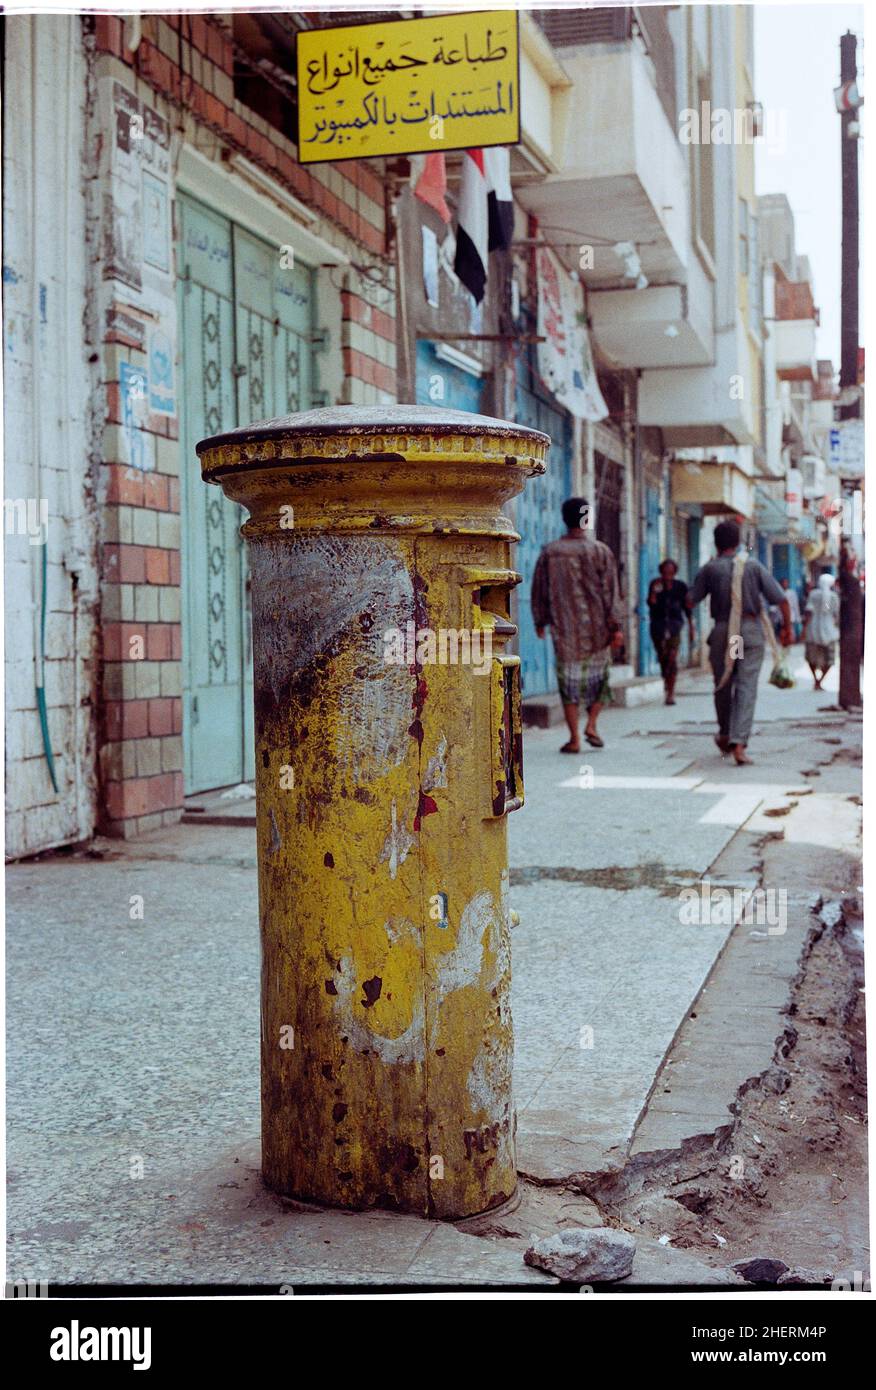 British era postal box in the city of Aden, the port and former colonial capital of Yemen, the entrance to the Red Sea, Western Asia Stock Photo